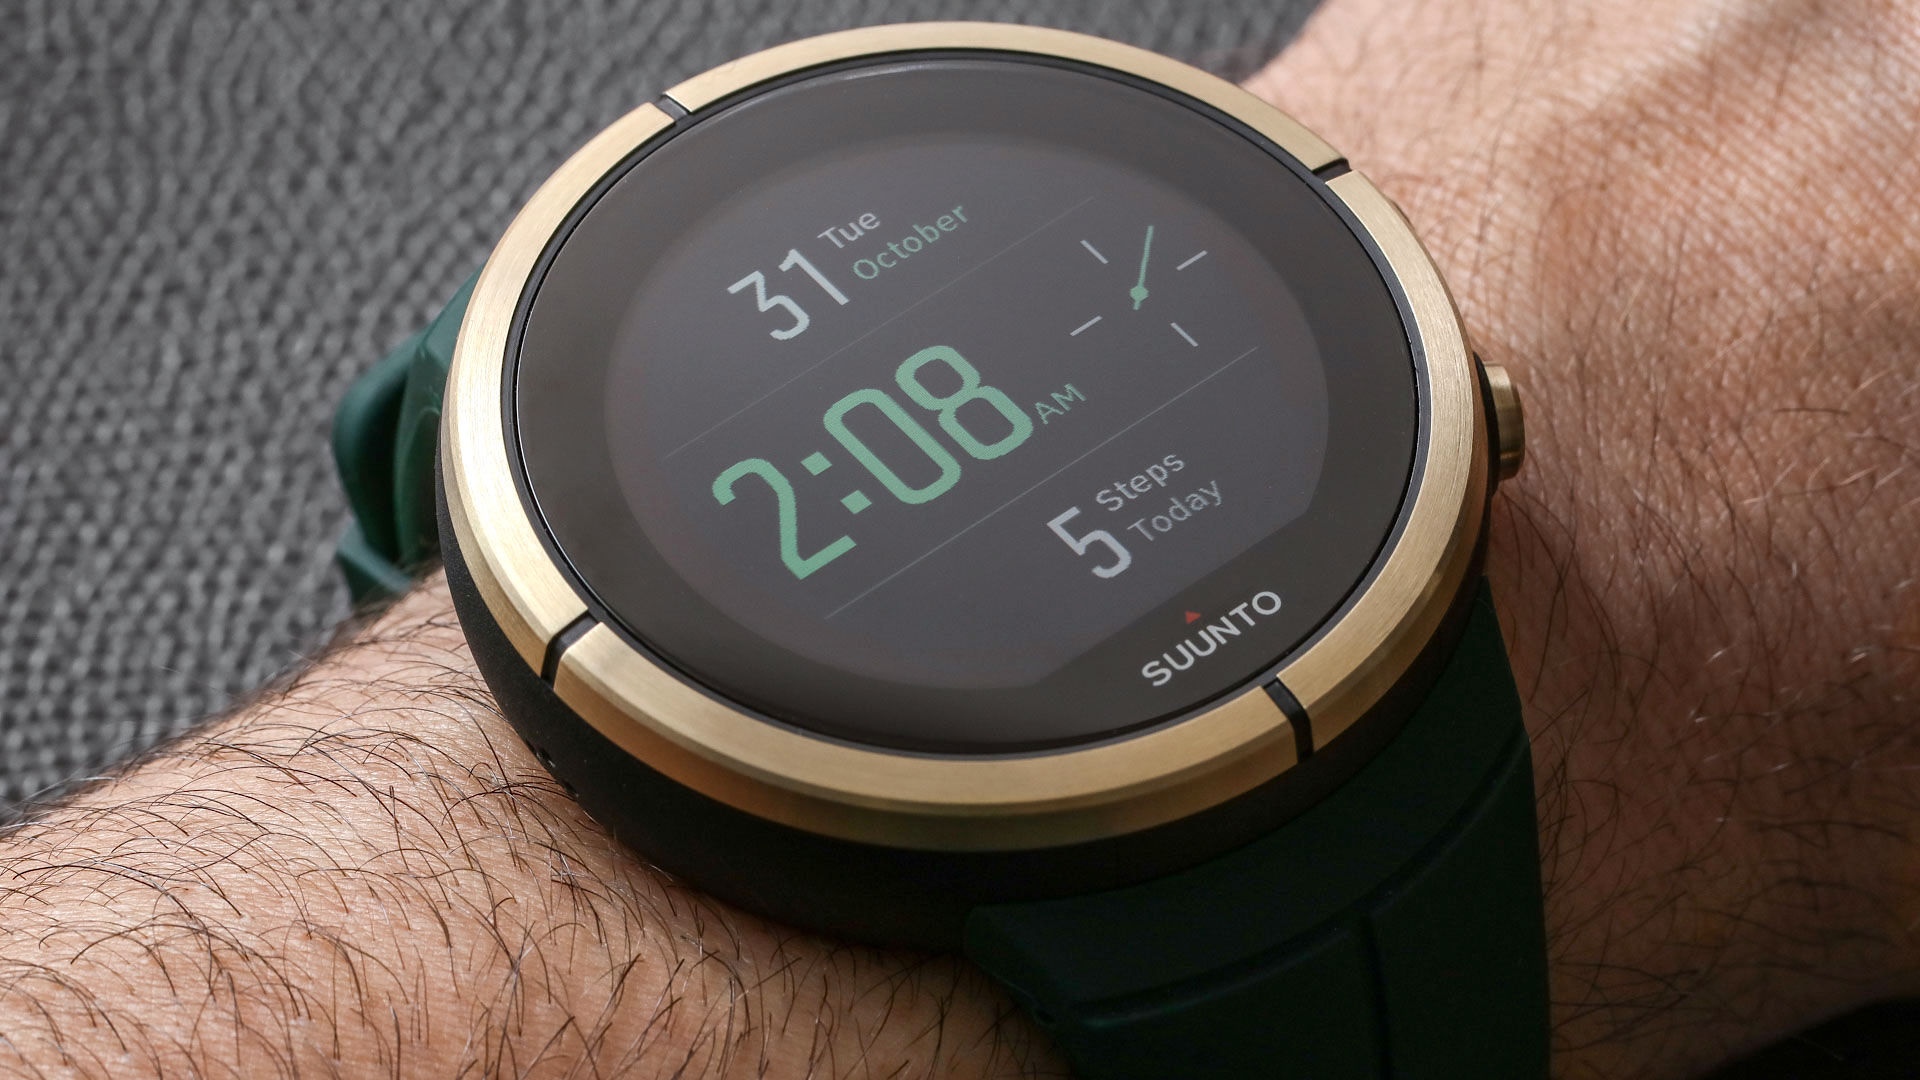 Review: An Afternoon Hike With The Suunto Spartan Ultra Fitness GPS Smartwatch